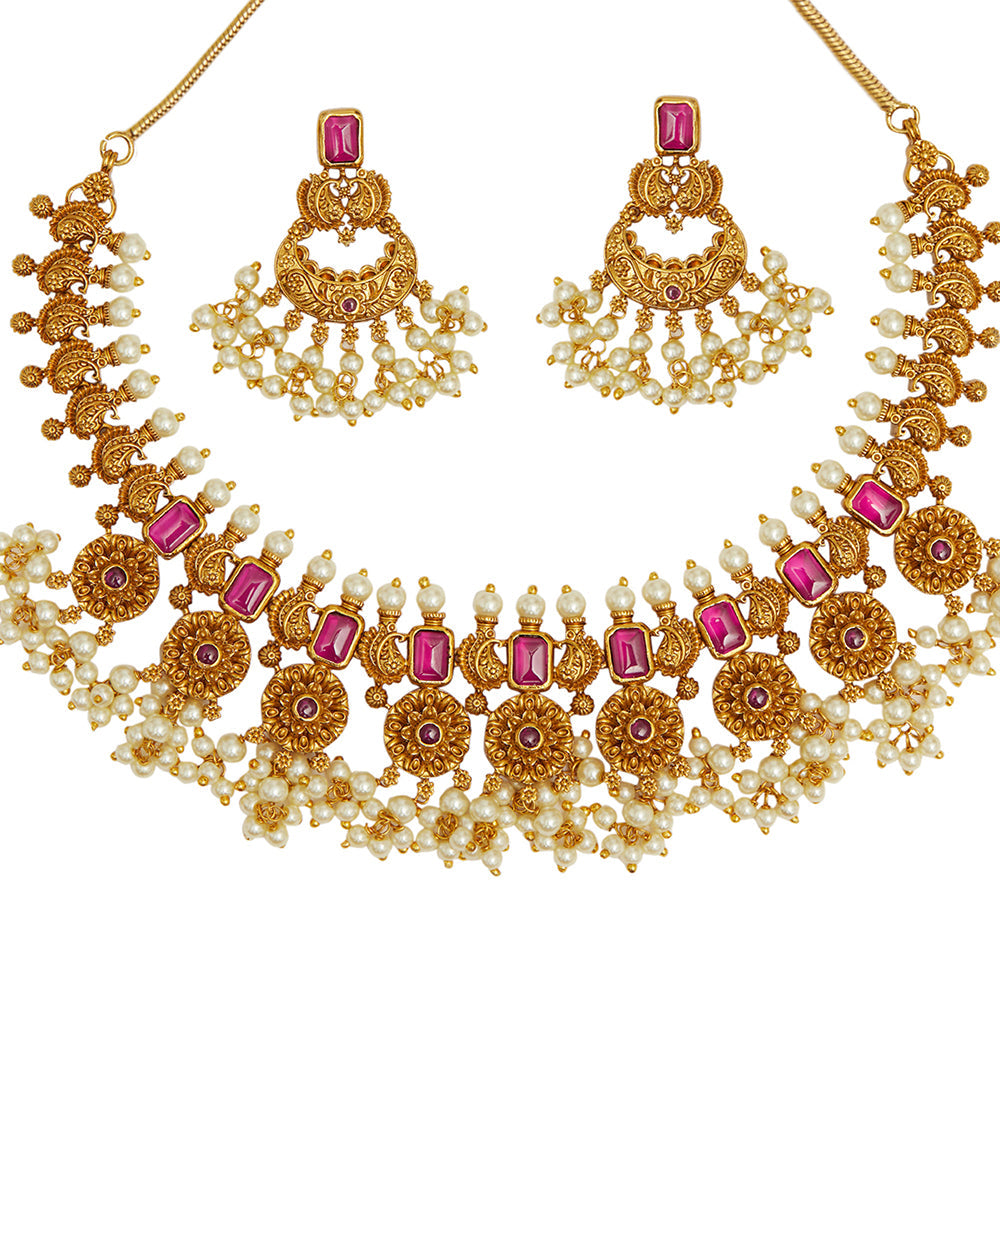 Women's Paisley Motifs Cz Gems And Faux Pearls Gold Toned Brass Jewellery Set - Voylla